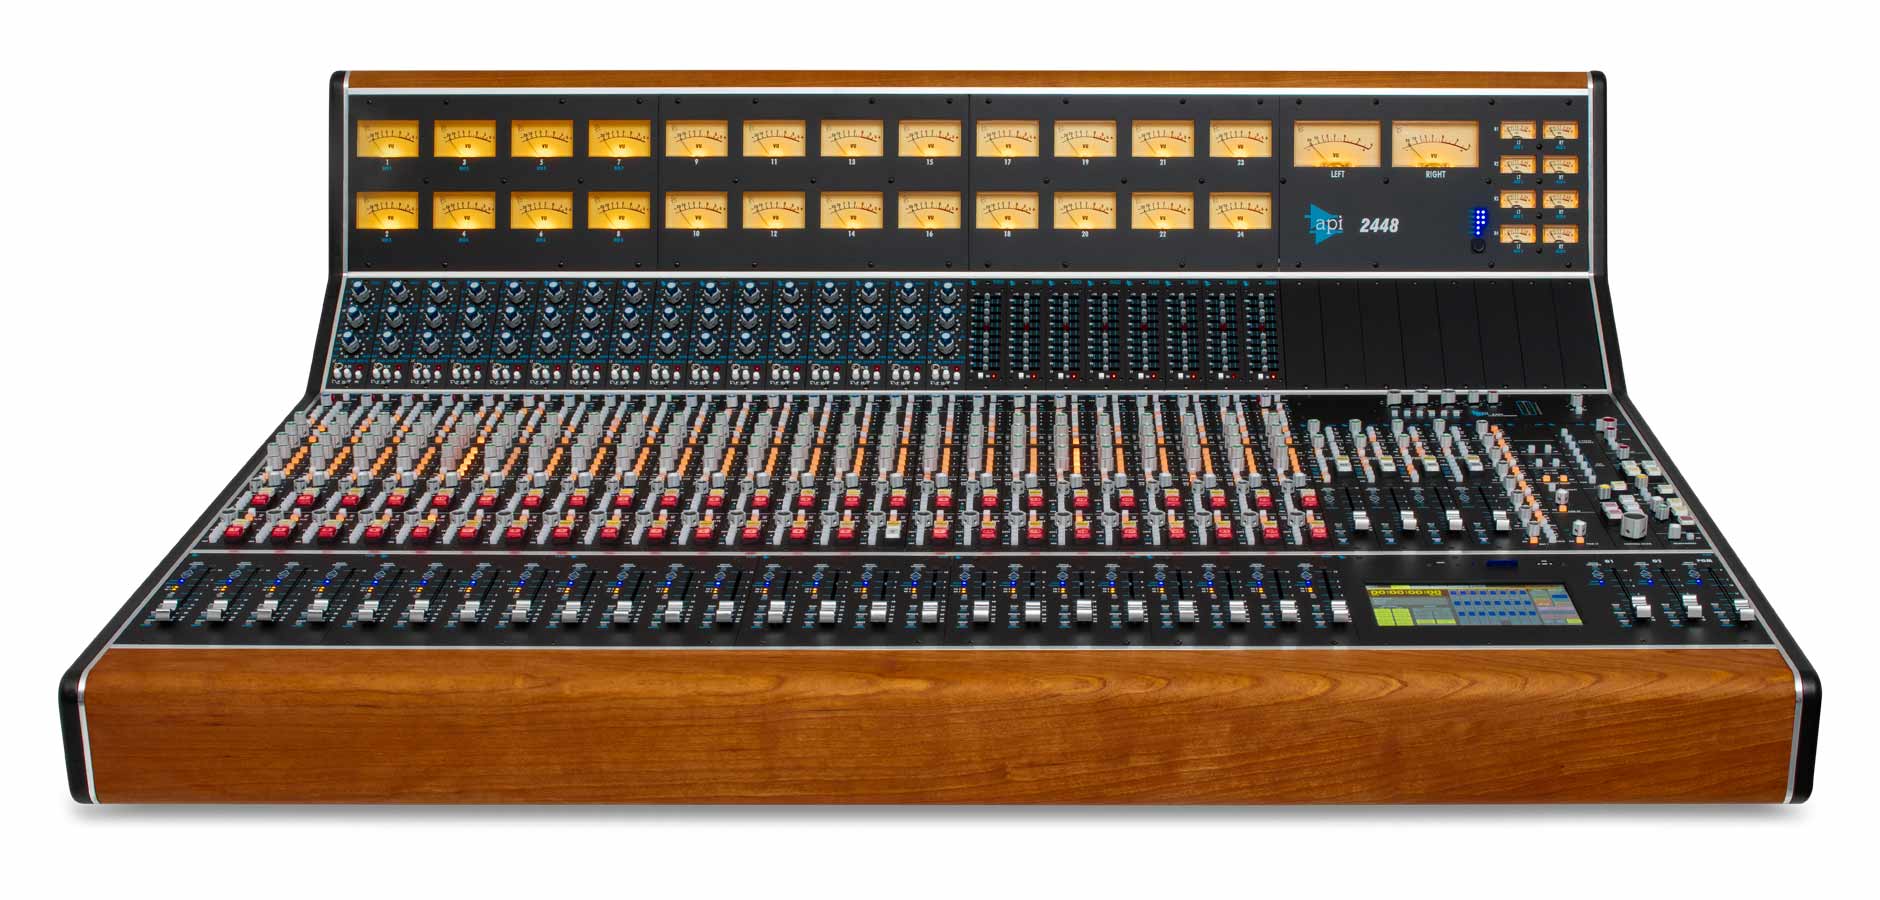 API Audio 2448 Recording and Mixing Console With Final Touch Automation - Professional Audio Design, Inc